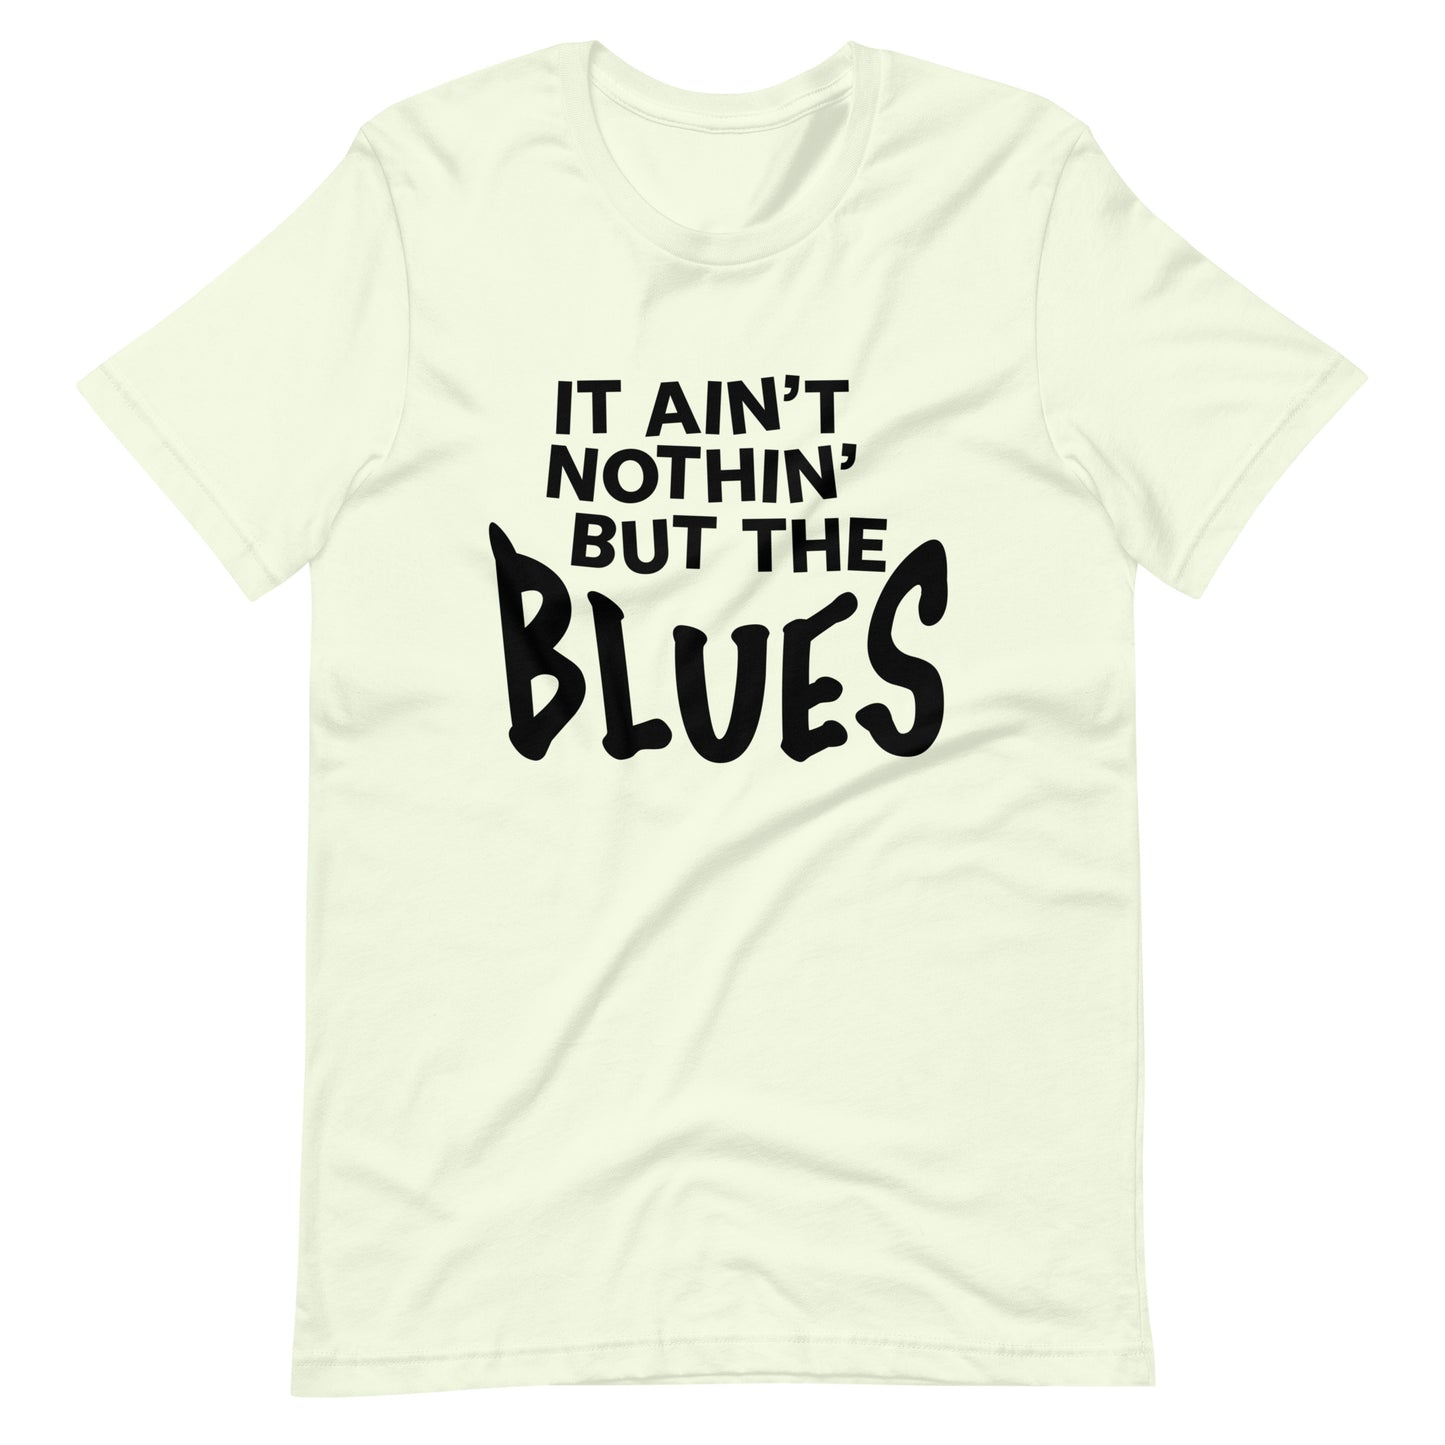 Nothin’ But The Blues Tee